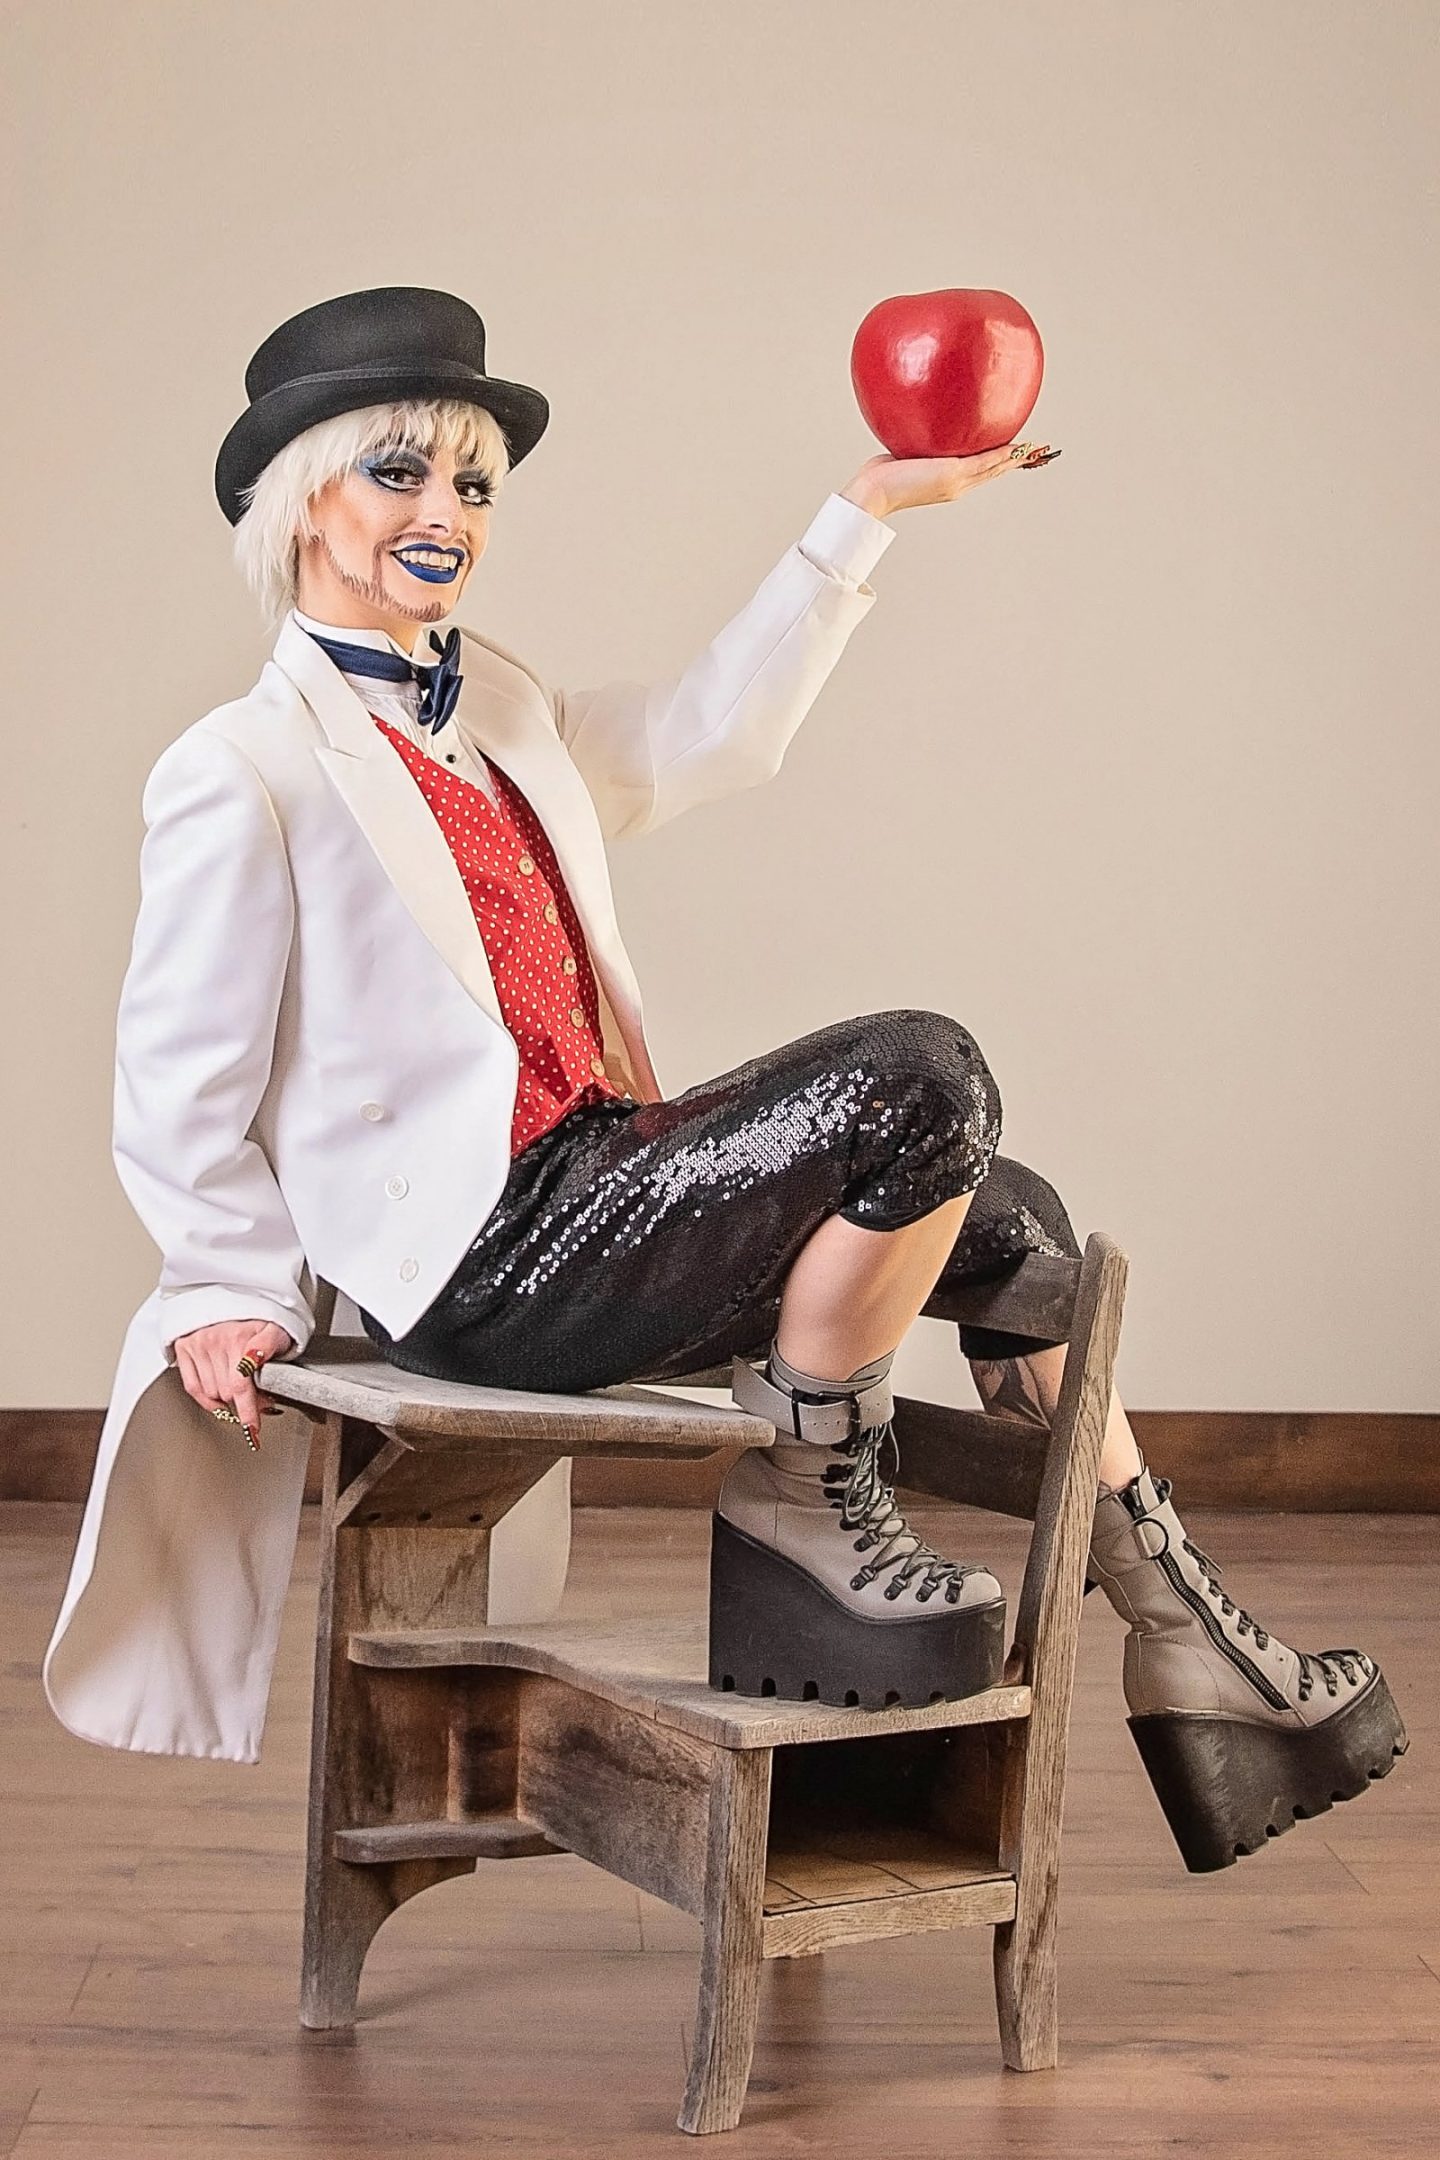 Dare de LaFemme sits jauntily on a small wooden desk holding a large red apple. They are wearing a black hat, white waistcoast, red polka dot vest with a blue bowtie, and black sequin capris pants.